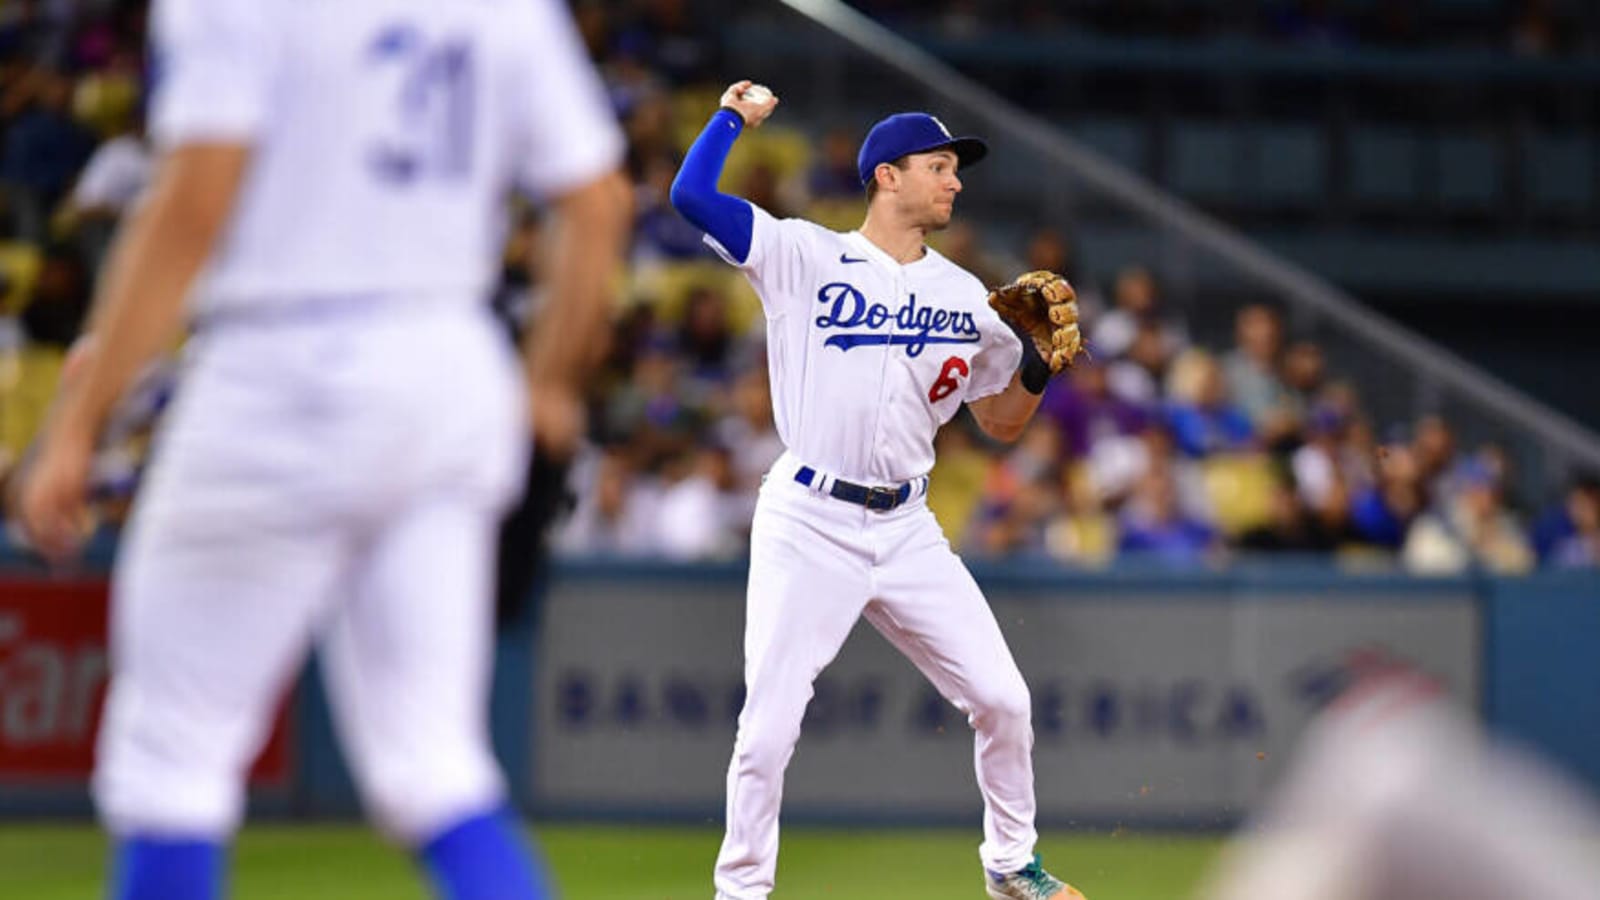 Dave Roberts Hopes Dodgers’ ‘Sloppy’ Play Not Indicative Of Losing Focus